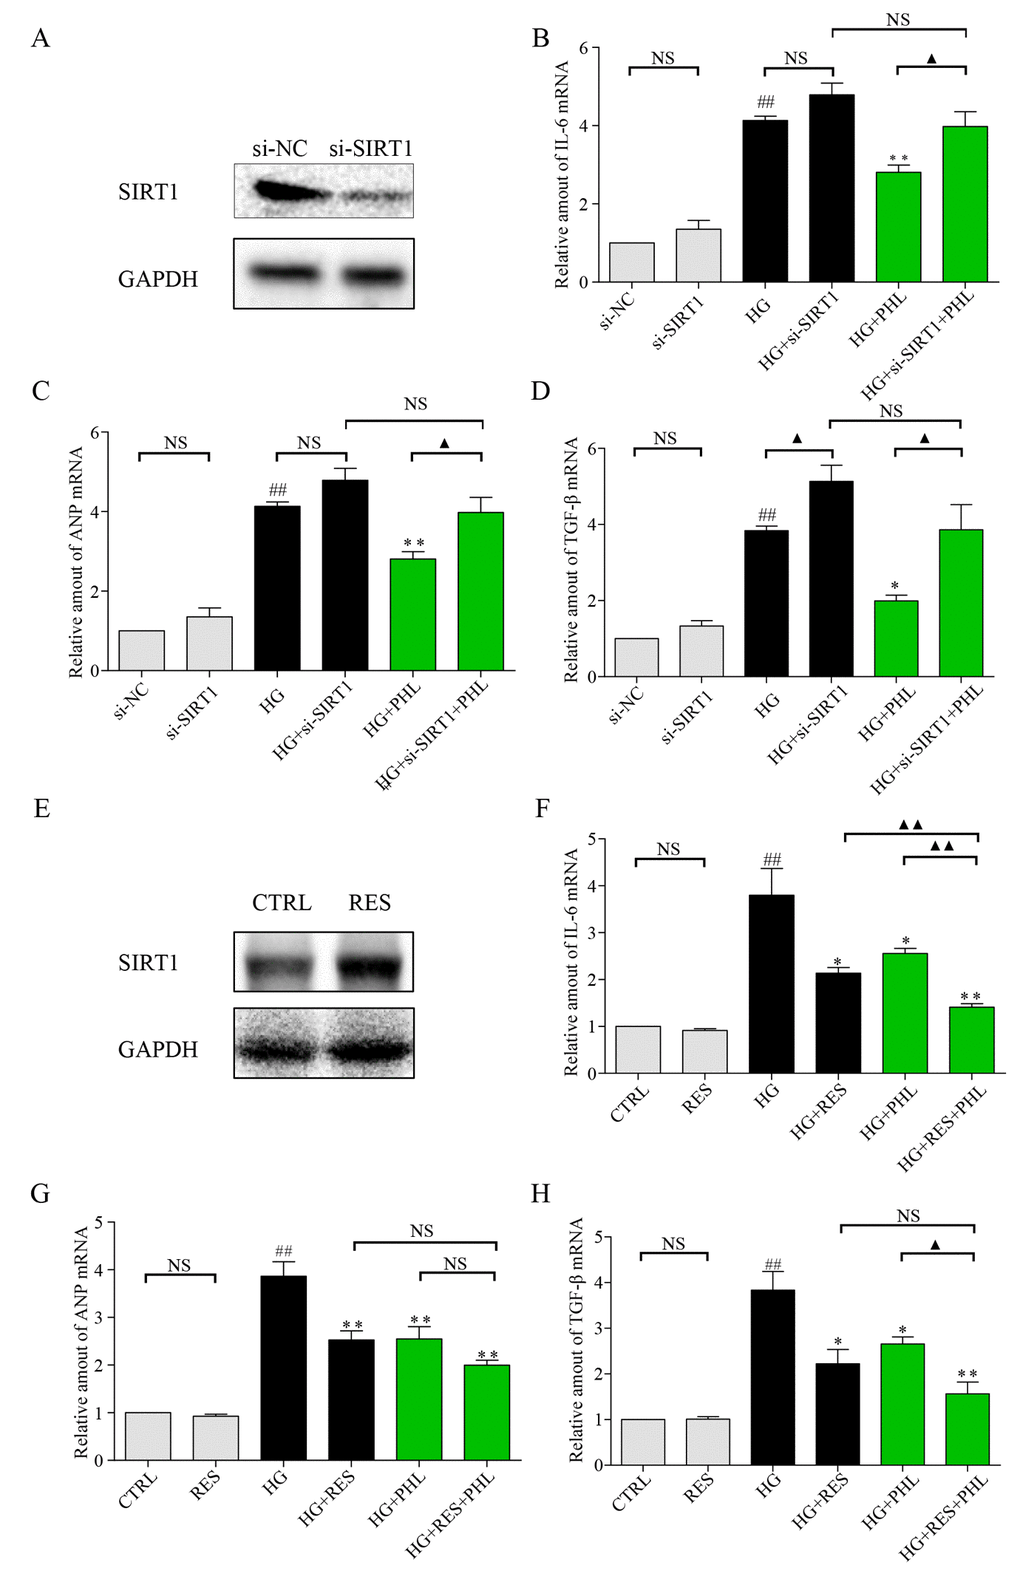 Knockdown of SIRT1 aggravate HG induced inflammation, hypertrophy and fibrosis mRNA level in H9C2 cells. (A) Knockdown of SIRT1 expression by siRNA in H9C2 cells. Assessment of SIRT1 protein levels was performed 48 h following transfection. (B-D) Real-time qPCR assay showed the mRNA levels of IL-6 (B), ANP (C), and TGF-β (D) in negative control (NC) or SIRT1 siRNA transfected H9C2 cells treated with HG. H9C2 cells pre-treated with PHL (20 μM) for 1 h were stimulated by HG (33 mM). (E) Overexpression of SIRT1 expression by RES (50 μM) in H9C2 cells. Assessment of SIRT1 protein levels was performed 24 h after treatment for RES. (F-H) H9C2 cells pre-treated with RES, PHL or RES+PHL for 1 h were stimulated by HG (33 mM). Real-time qPCR assay showed the mRNA levels of IL-6 (F), ANP (G), and TGF-β (H). Data are presented as means ± SEM. *P ##P ▲P ▲▲P 